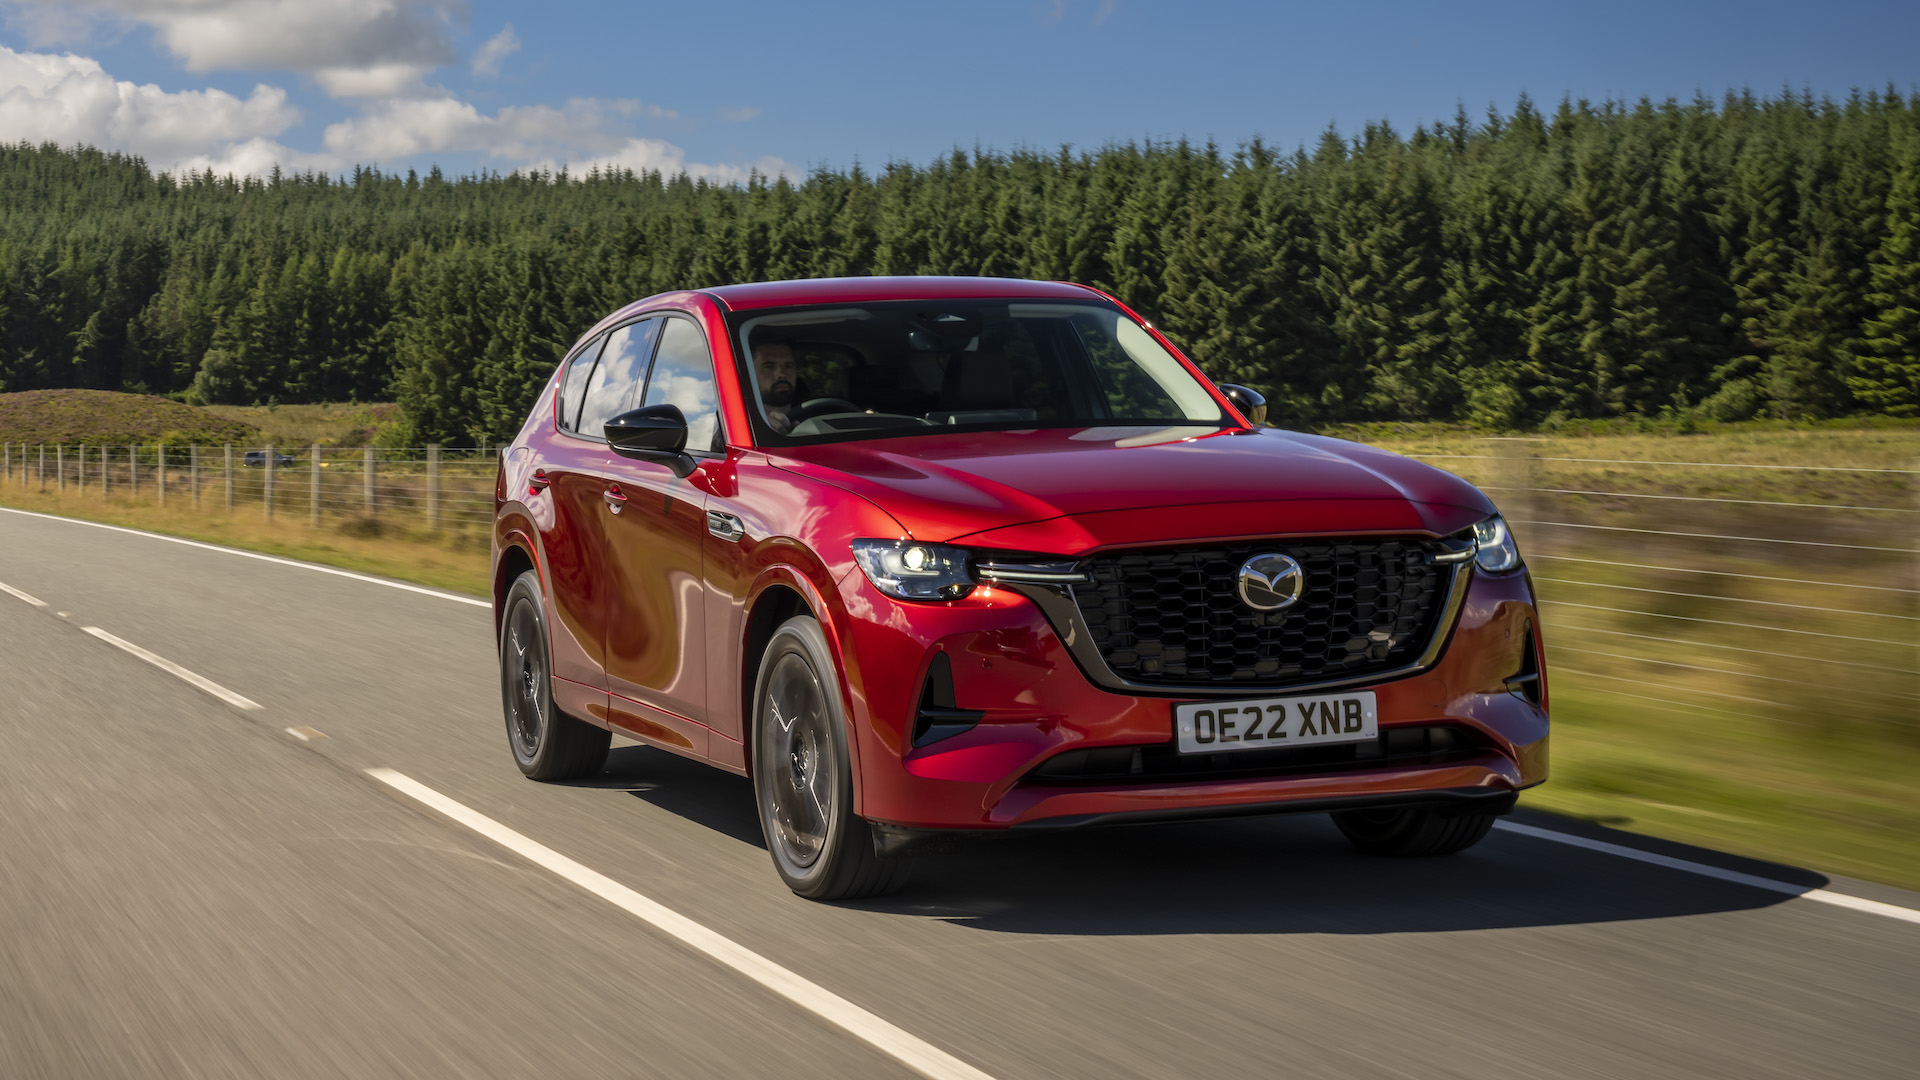 Video Review: A Quieter and More Refined Mazda CX-5 - The New York Times